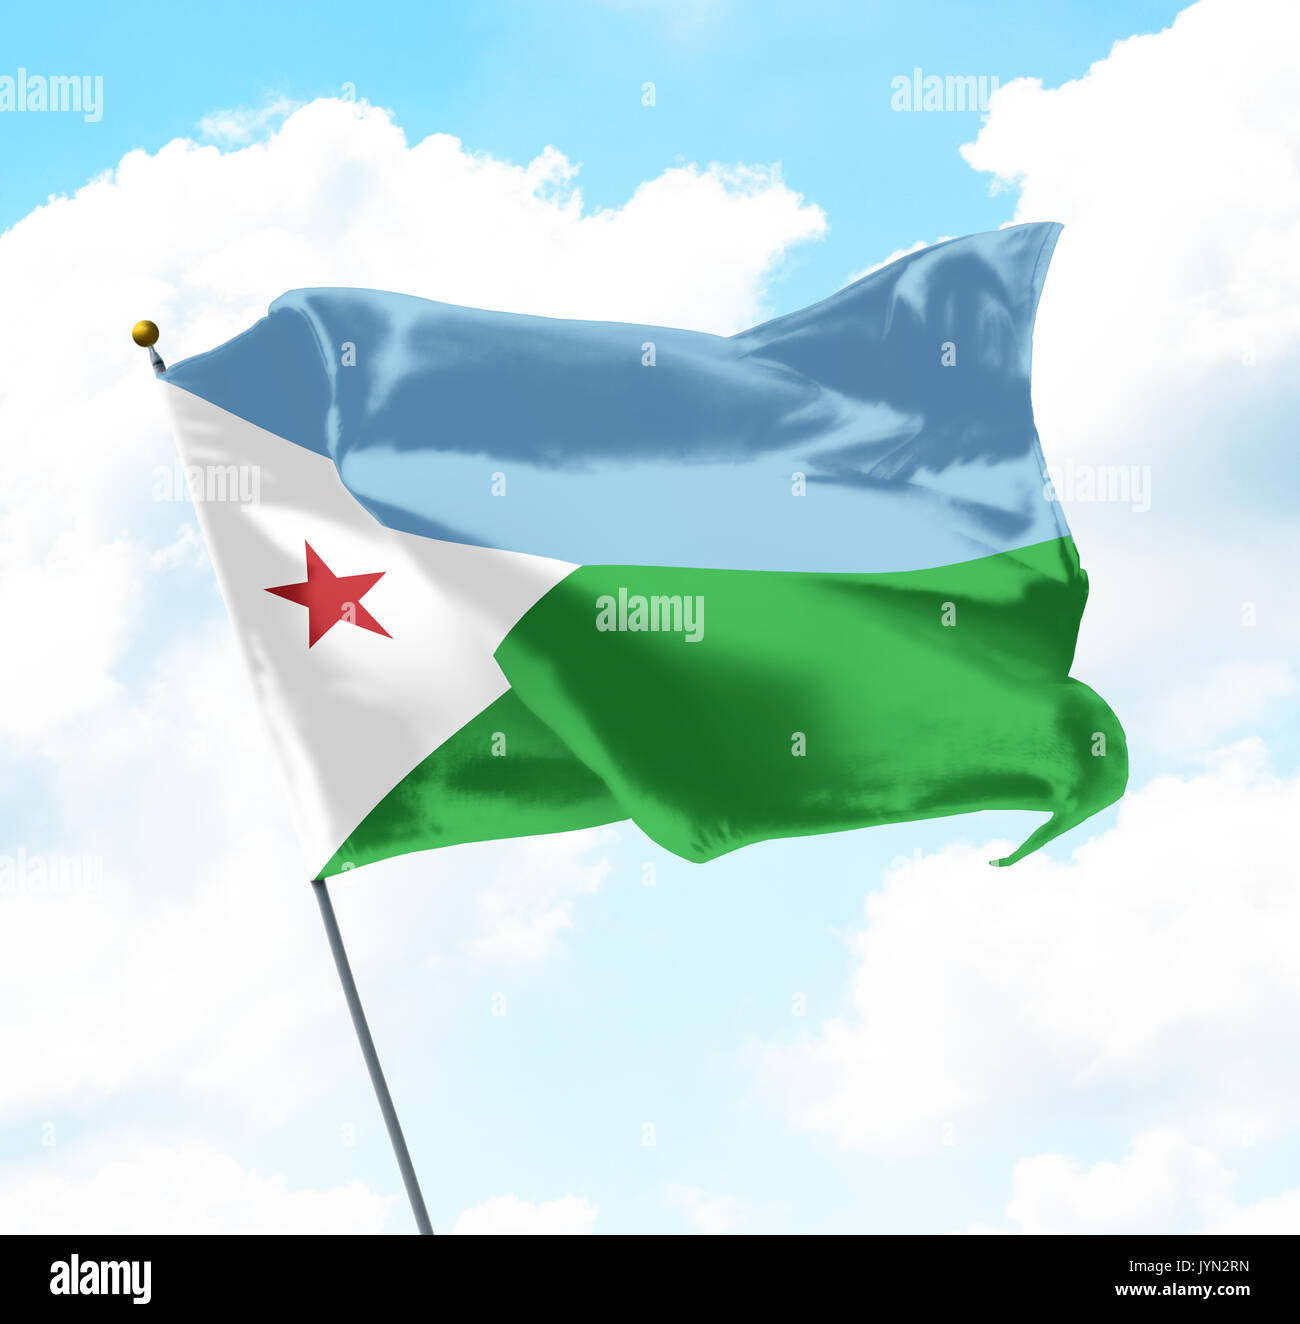 Flag of Djibouti Raised Up in The Sky Stock Photo